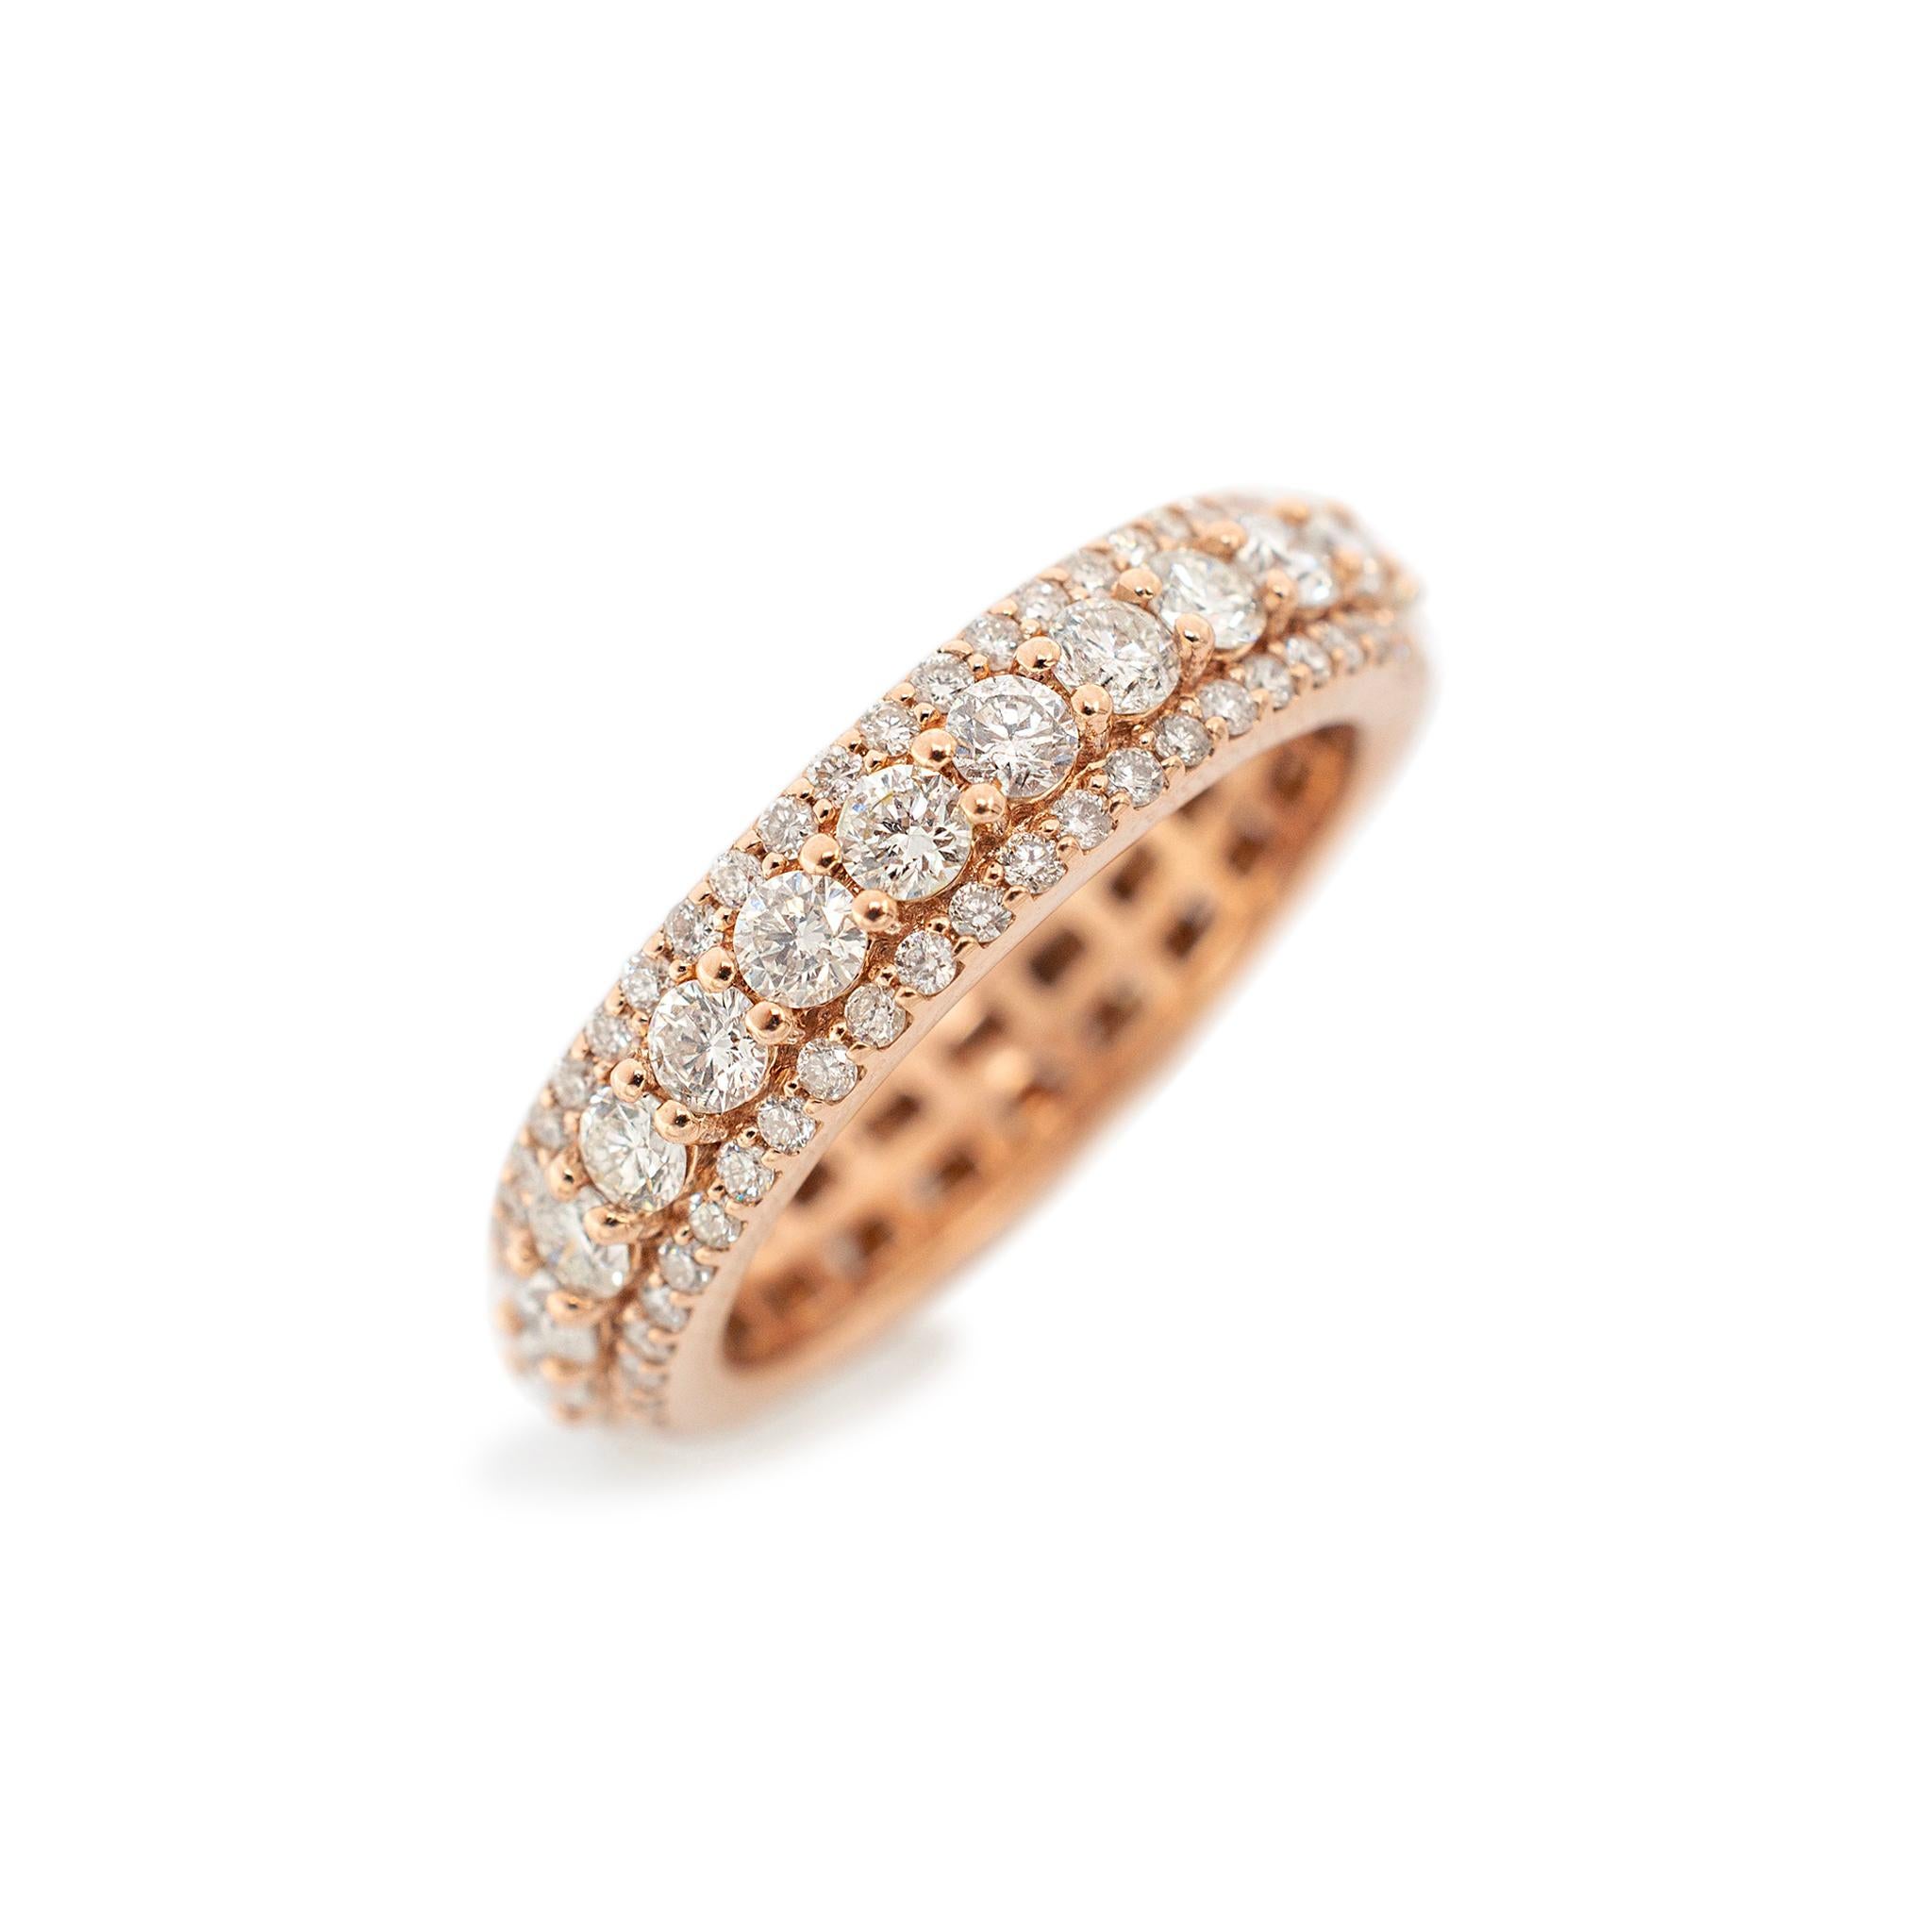 Gender: Ladies

Metal Type: 10K Rose Gold

Size: 10

Shank Maximum Width: 5.60 mm

Weight: 6.36 grams

Ladies 10K rose gold three-row diamond wedding eternity band with a half-round shank. Engraved with 